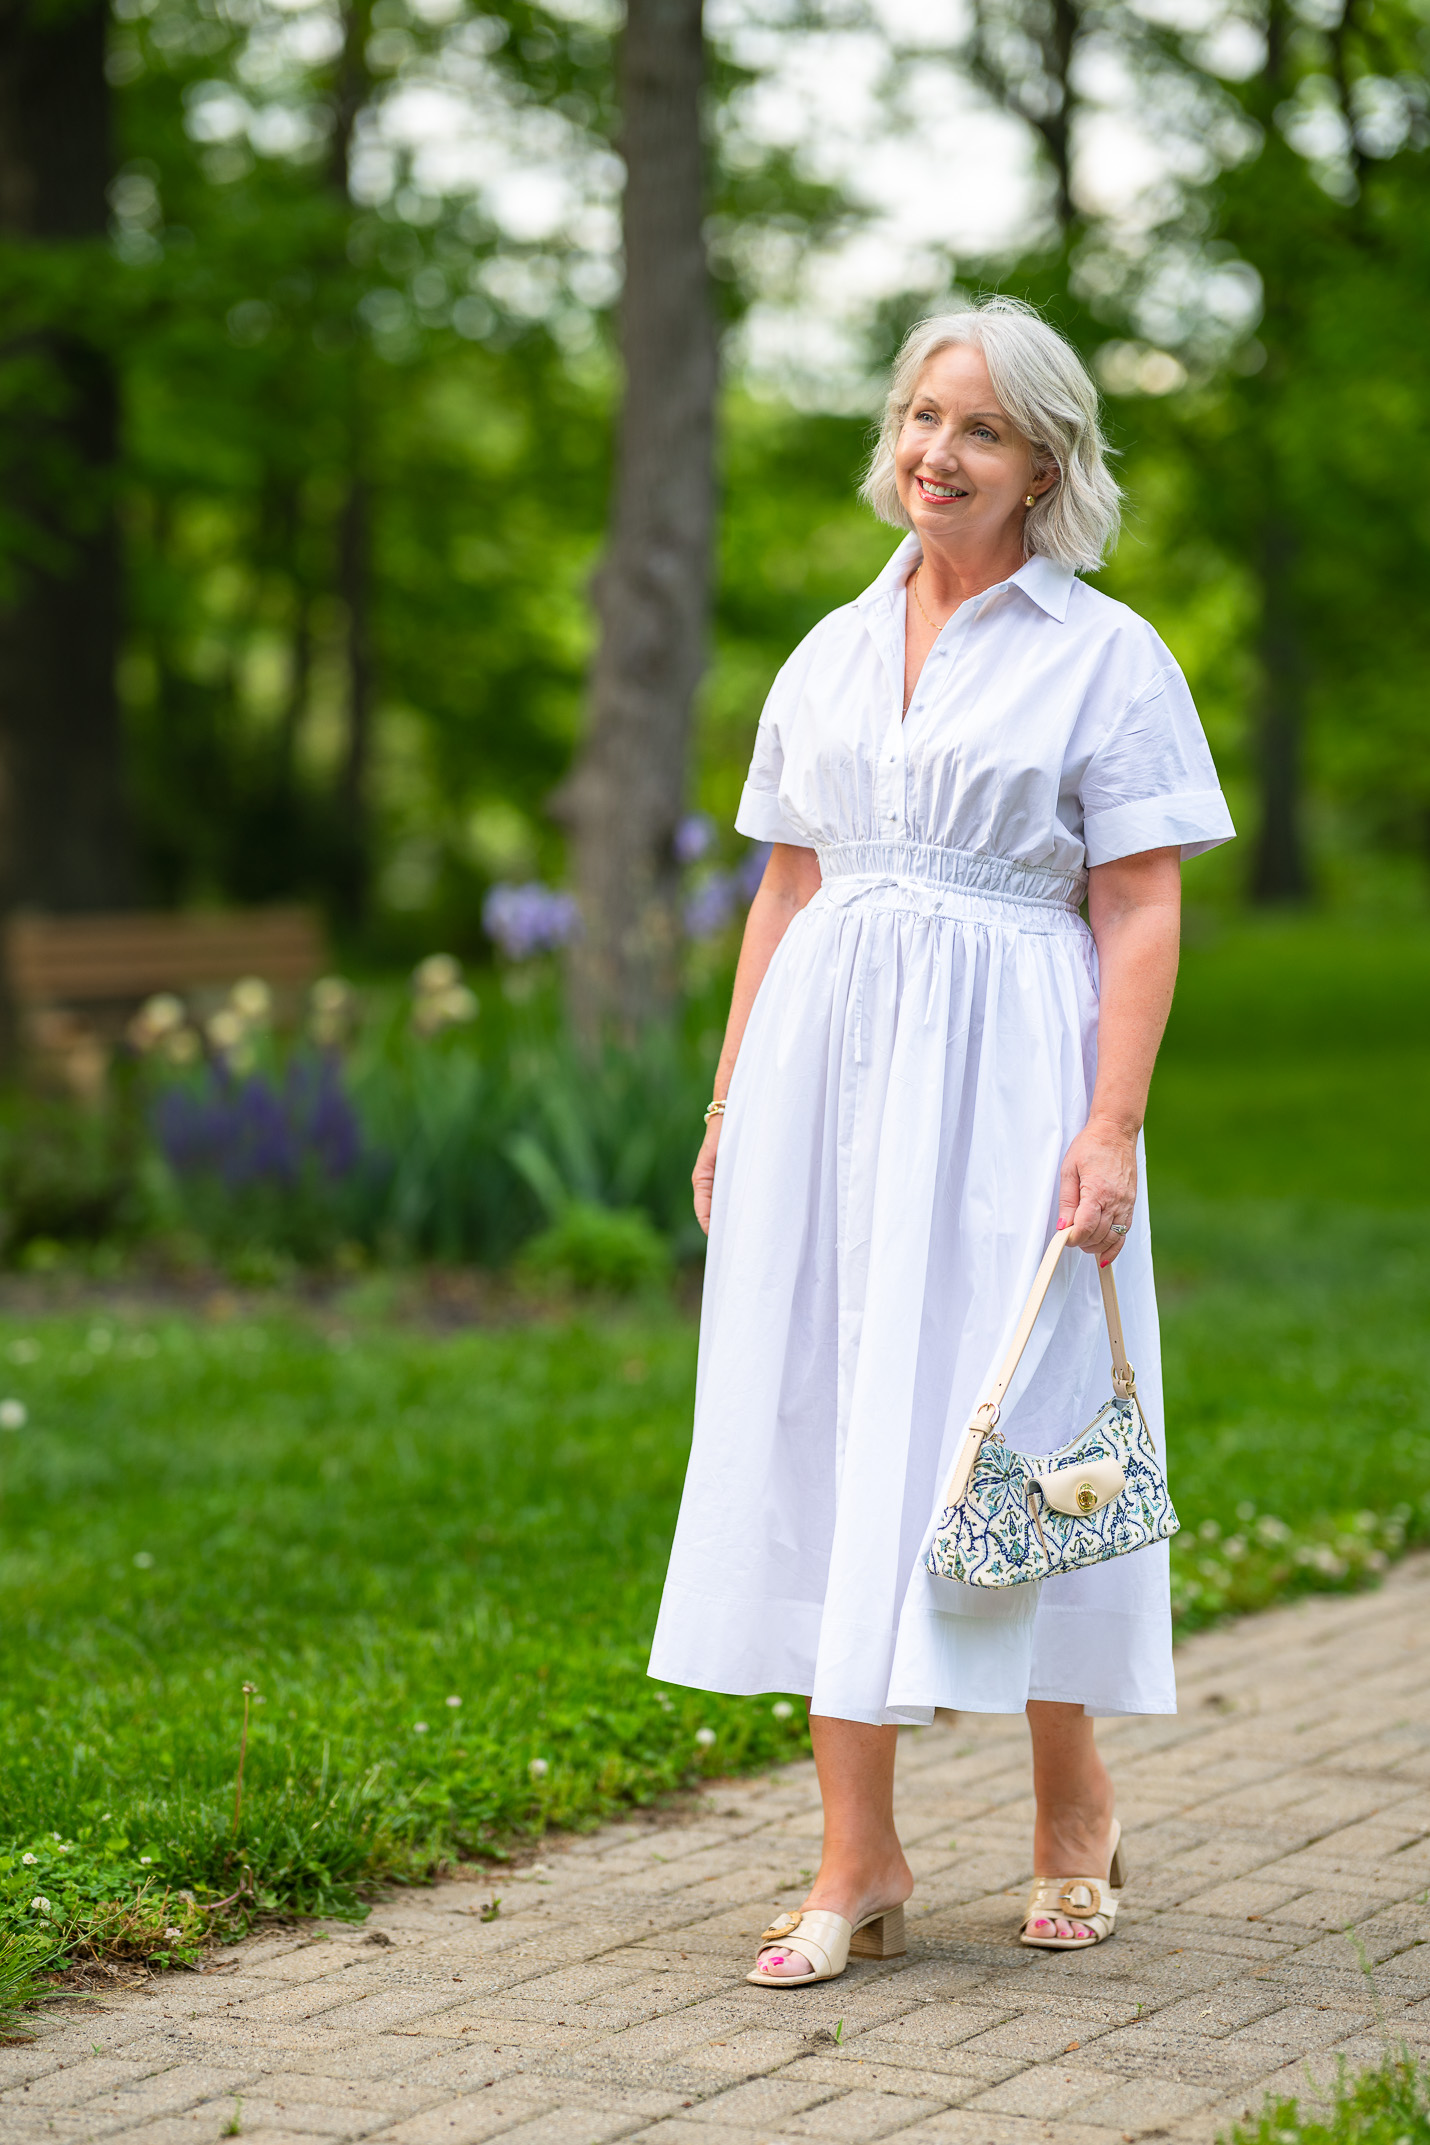 Can You Wear a Trending White Dress Over 50?